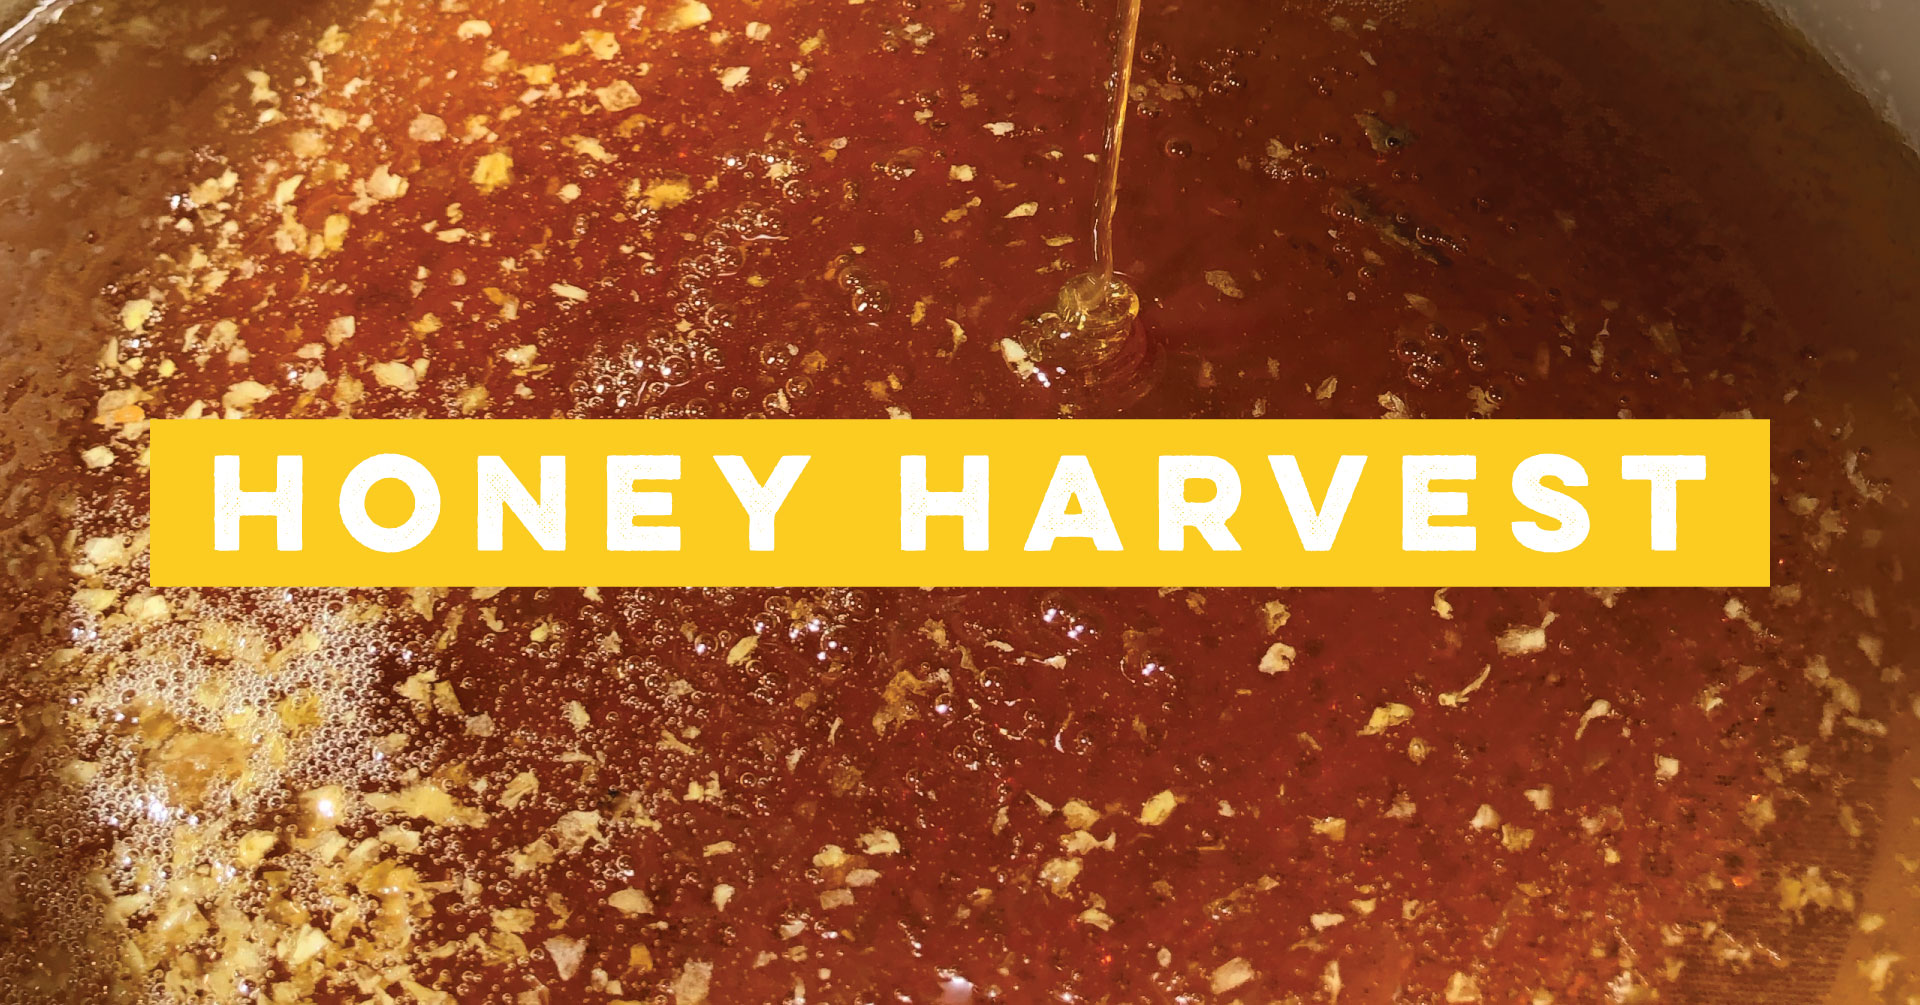 Castro Valley Honey Harvest at the Marketplace